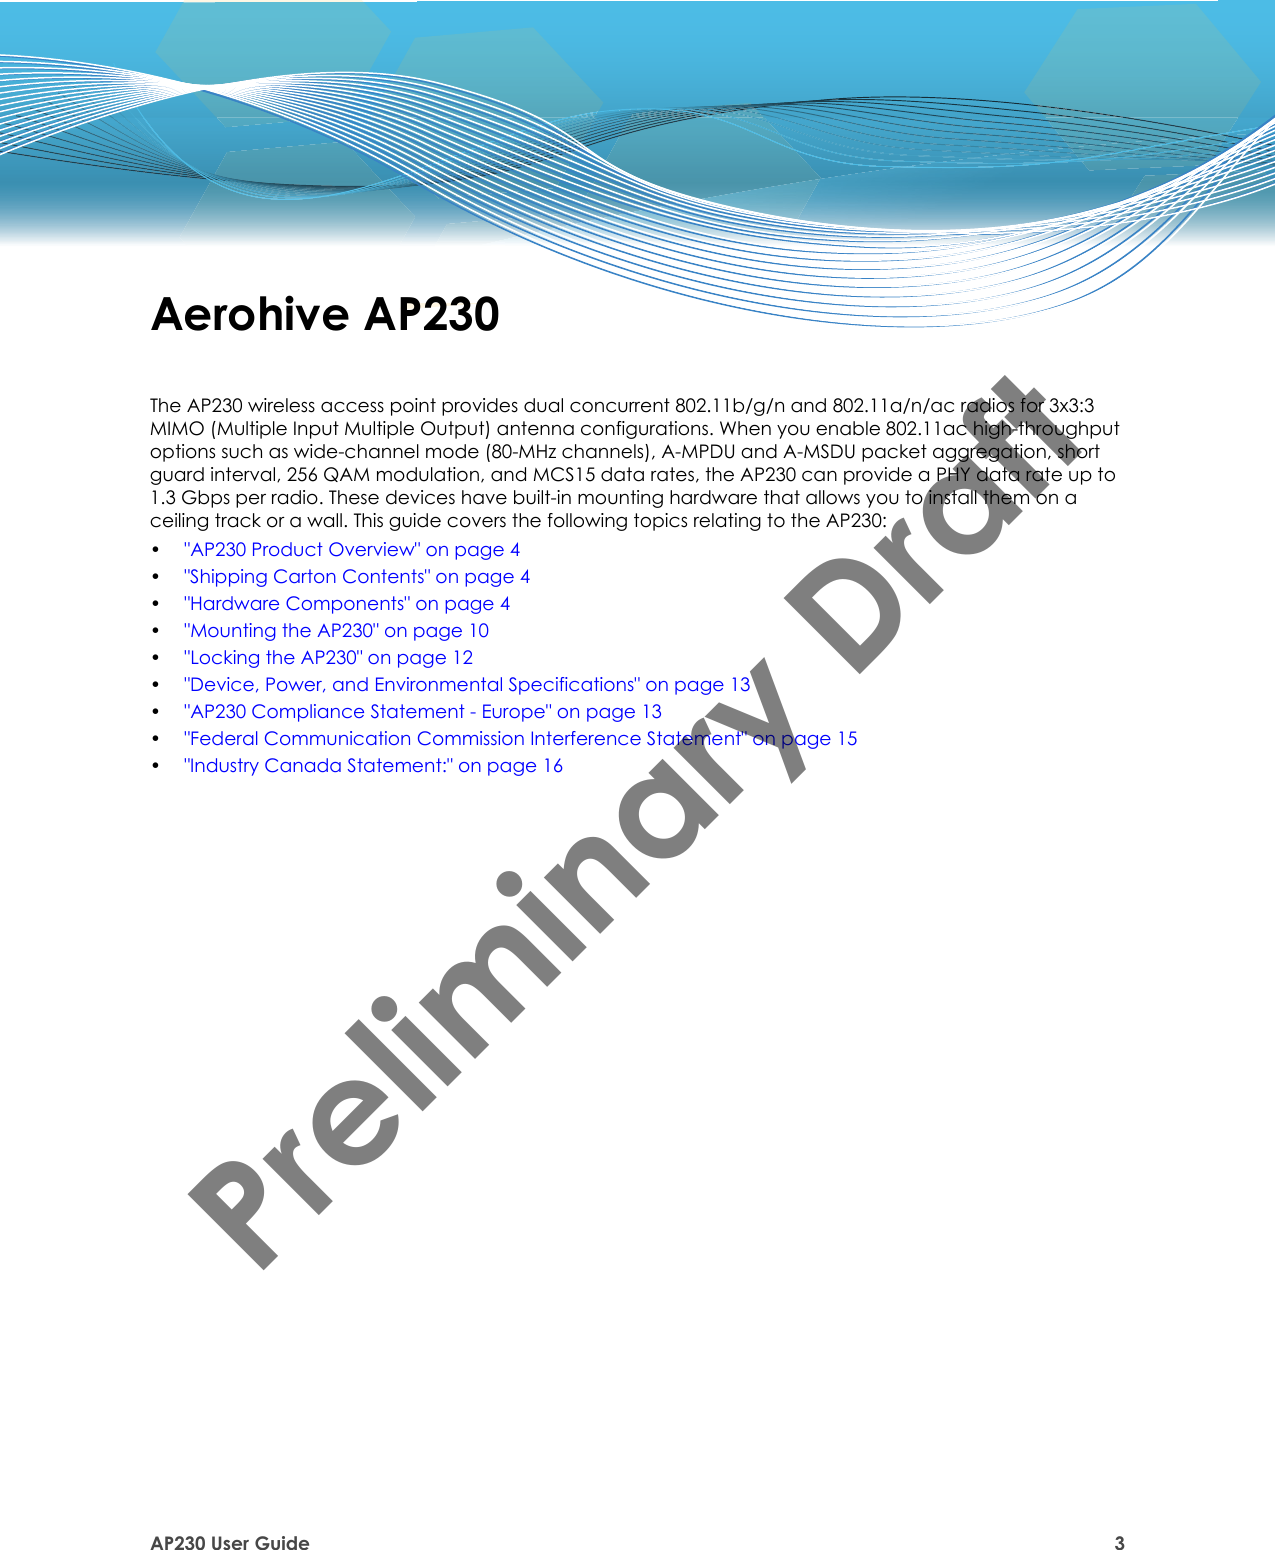 AP230 User Guide 3Aerohive AP230The AP230 wireless access point provides dual concurrent 802.11b/g/n and 802.11a/n/ac radios for 3x3:3 MIMO (Multiple Input Multiple Output) antenna configurations. When you enable 802.11ac high-throughput options such as wide-channel mode (80-MHz channels), A-MPDU and A-MSDU packet aggregation, short guard interval, 256 QAM modulation, and MCS15 data rates, the AP230 can provide a PHY data rate up to 1.3 Gbps per radio. These devices have built-in mounting hardware that allows you to install them on a ceiling track or a wall. This guide covers the following topics relating to the AP230:•&quot;AP230 Product Overview&quot; on page 4•&quot;Shipping Carton Contents&quot; on page 4•&quot;Hardware Components&quot; on page 4•&quot;Mounting the AP230&quot; on page 10•&quot;Locking the AP230&quot; on page 12•&quot;Device, Power, and Environmental Specifications&quot; on page 13•&quot;AP230 Compliance Statement - Europe&quot; on page 13•&quot;Federal Communication Commission Interference Statement&quot; on page 15•&quot;Industry Canada Statement:&quot; on page 16Preliminary Draft 